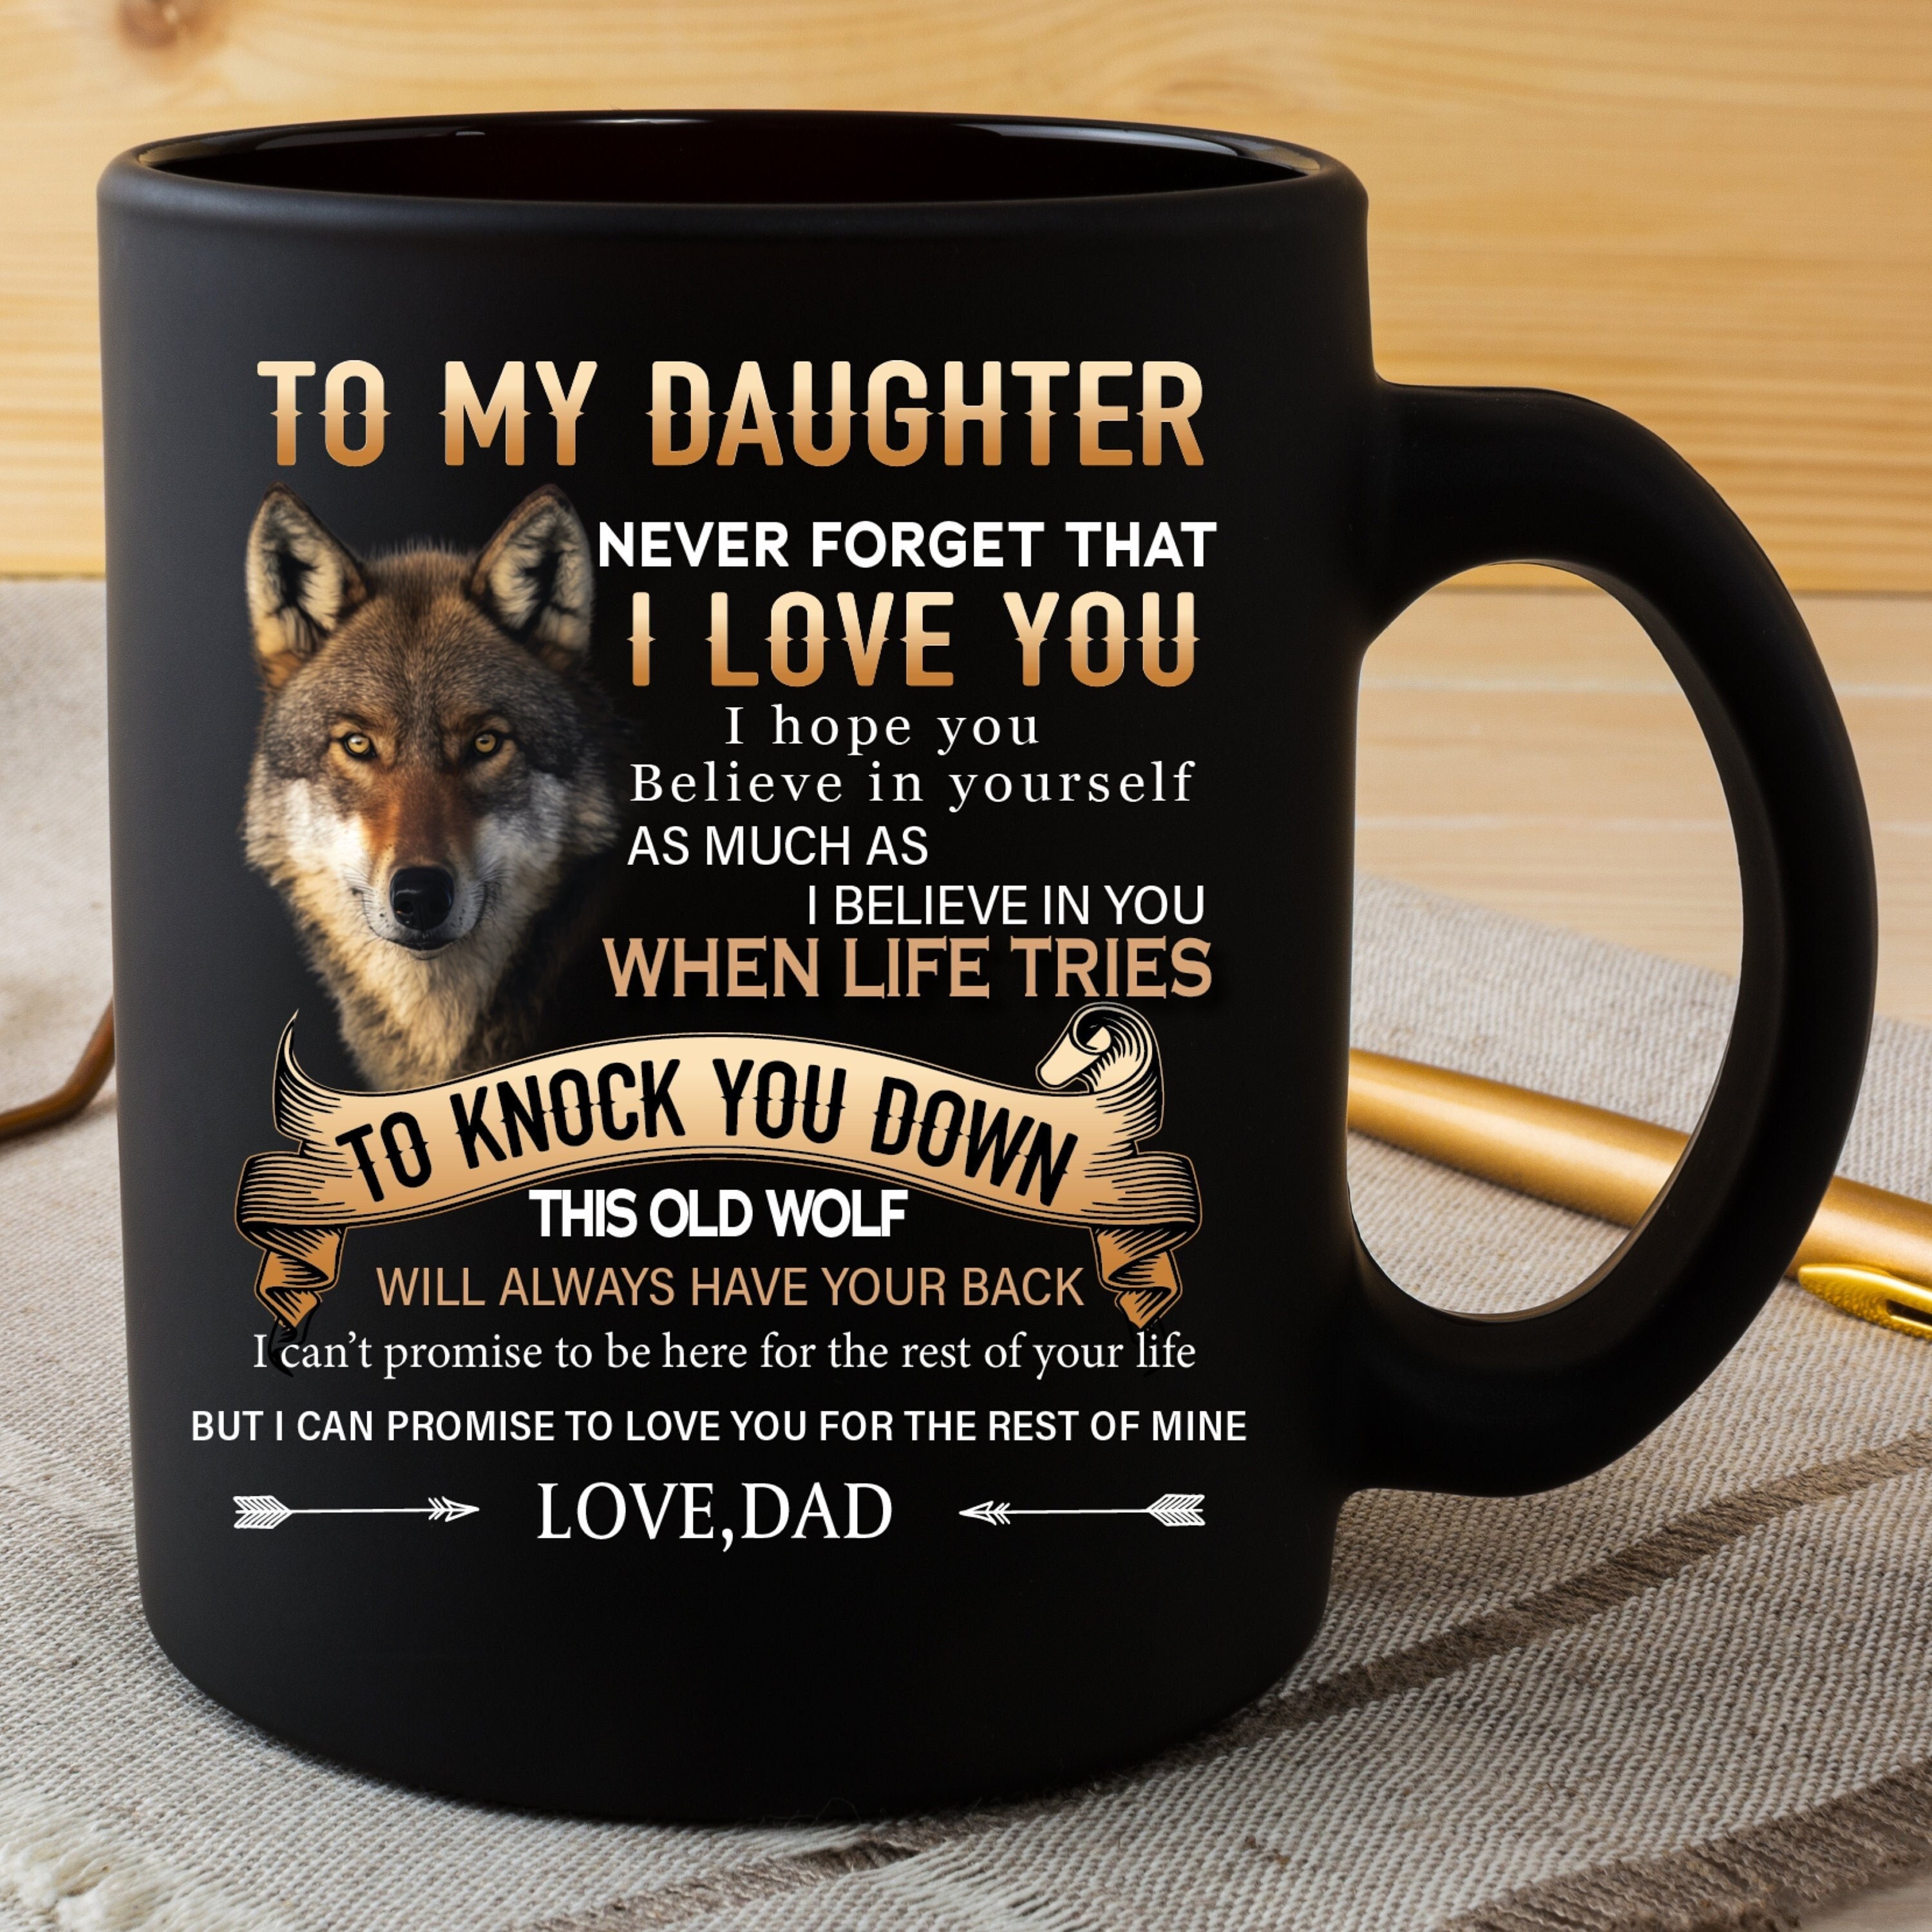 Daughter Gifts from Mom, Gifts for Daughter, to My Daughter Gifts for  Birthday, Mothers Day, Graduat…See more Daughter Gifts from Mom, Gifts for